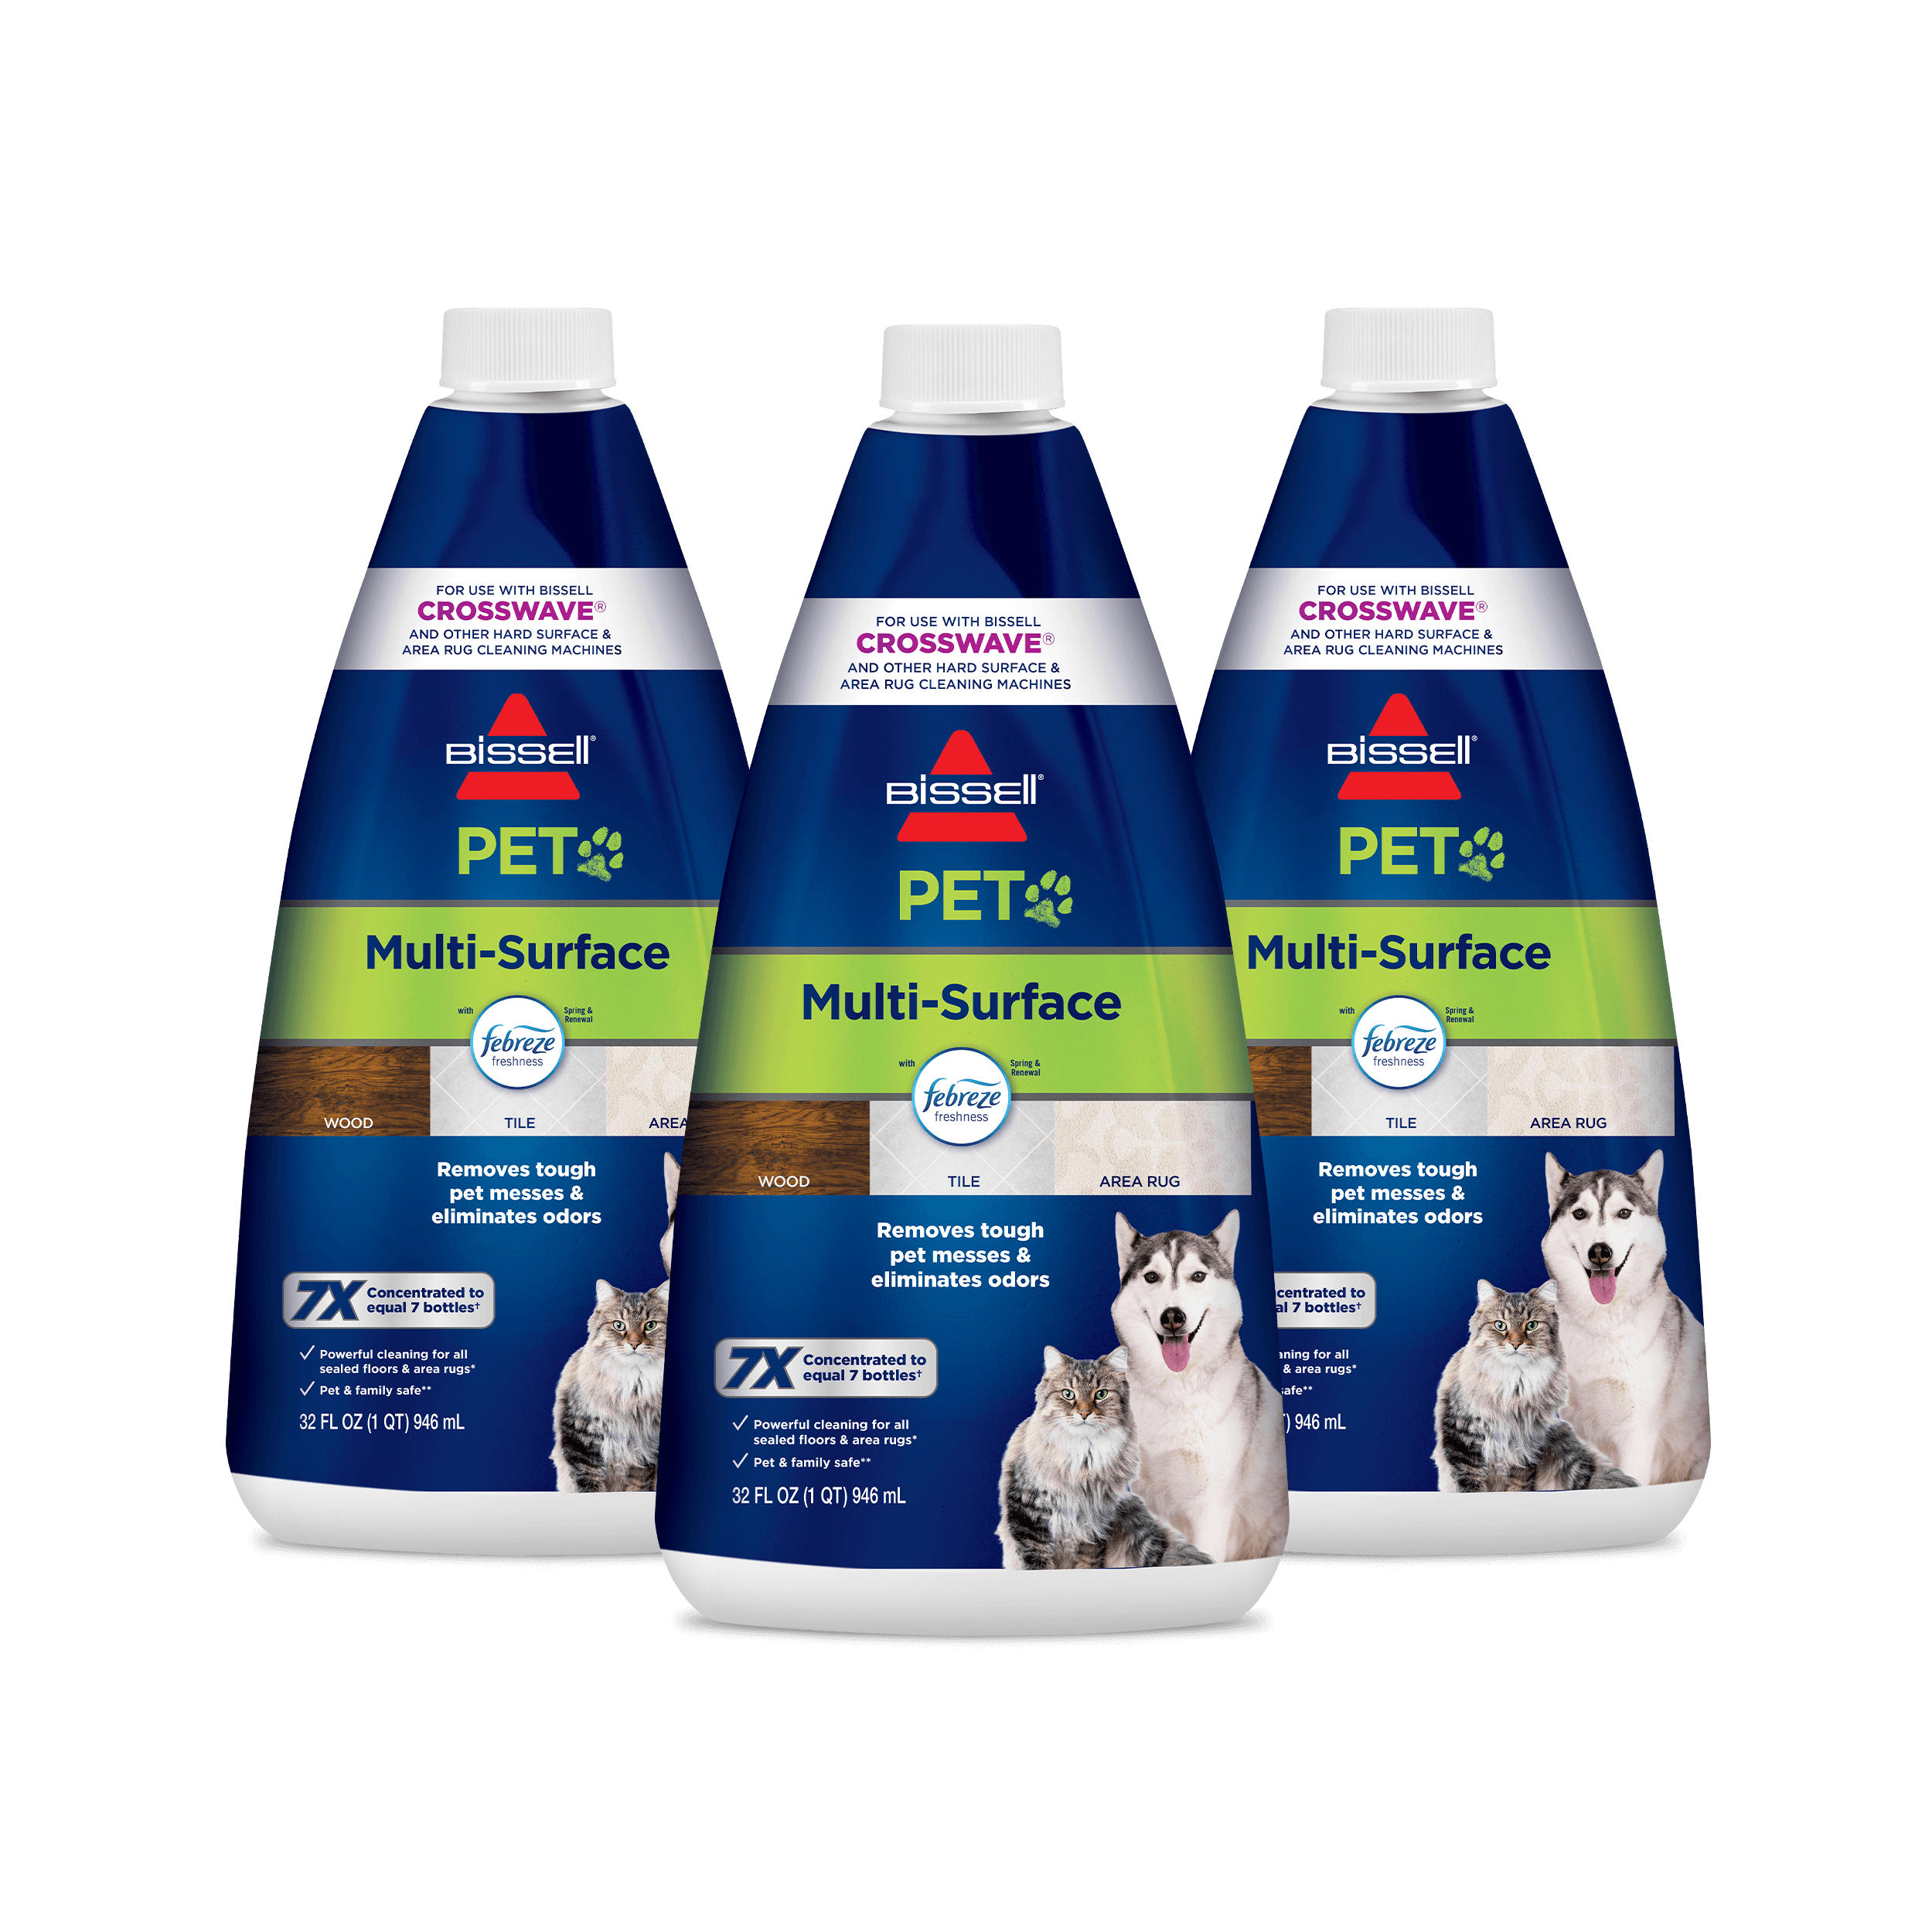 Multi-Surface Pet with Febreze 22959 | BISSELL Formula